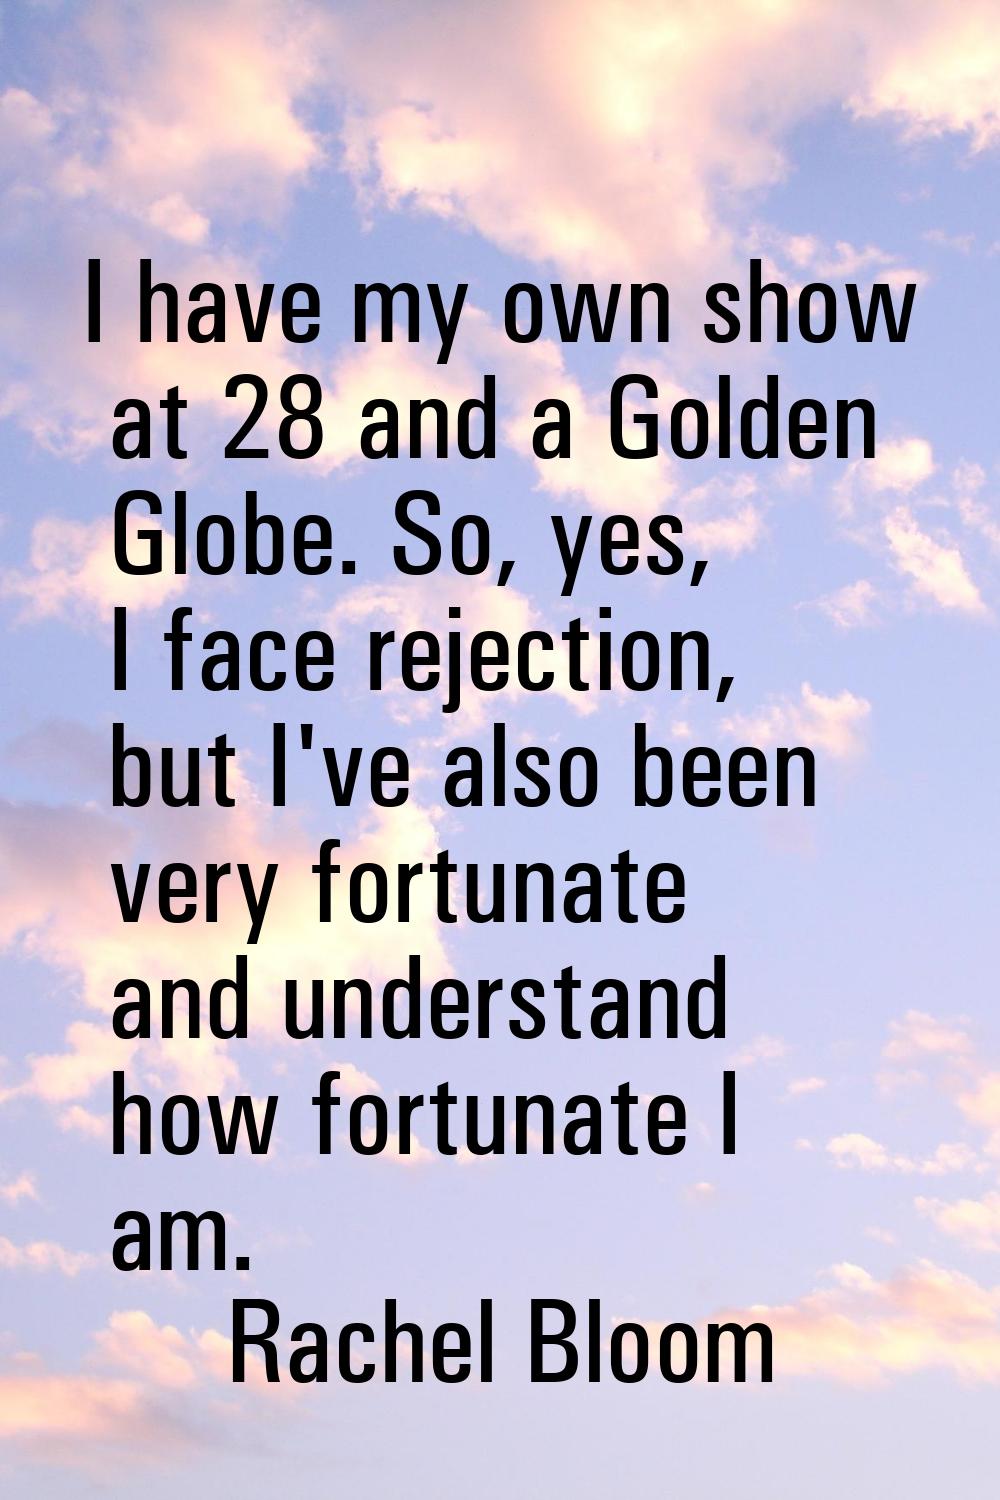 I have my own show at 28 and a Golden Globe. So, yes, I face rejection, but I've also been very for